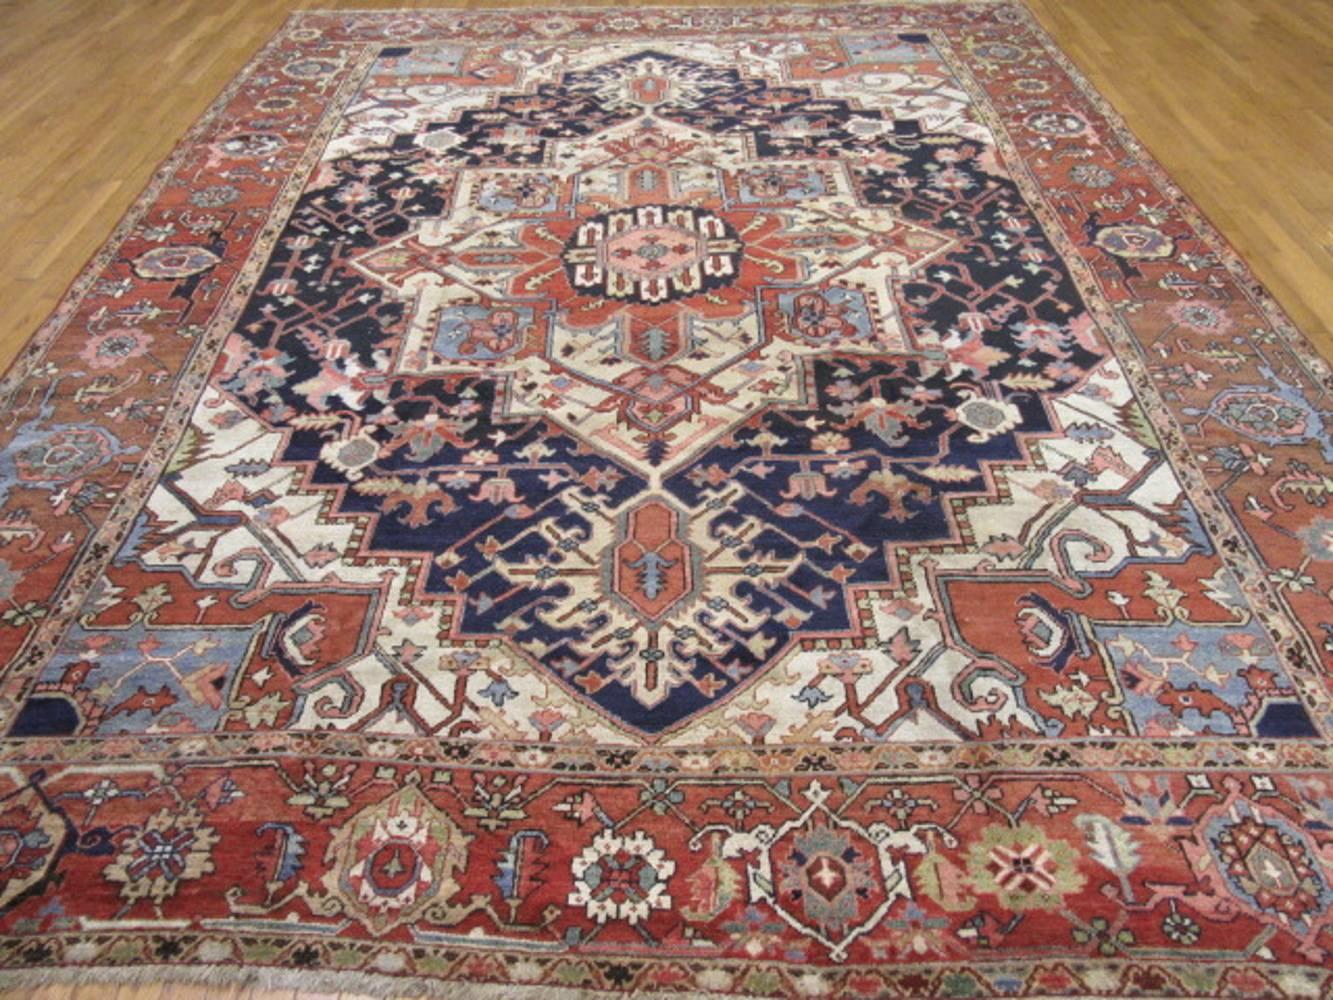 This is a room size hand-knotted antique Persian Serapi rug for the northwest region of Iran. Nomadic yet elegant, Heriz / Serapi rugs have always been a popular type of rug for color, design and ease of use. It measures approximately 10' x 13' and